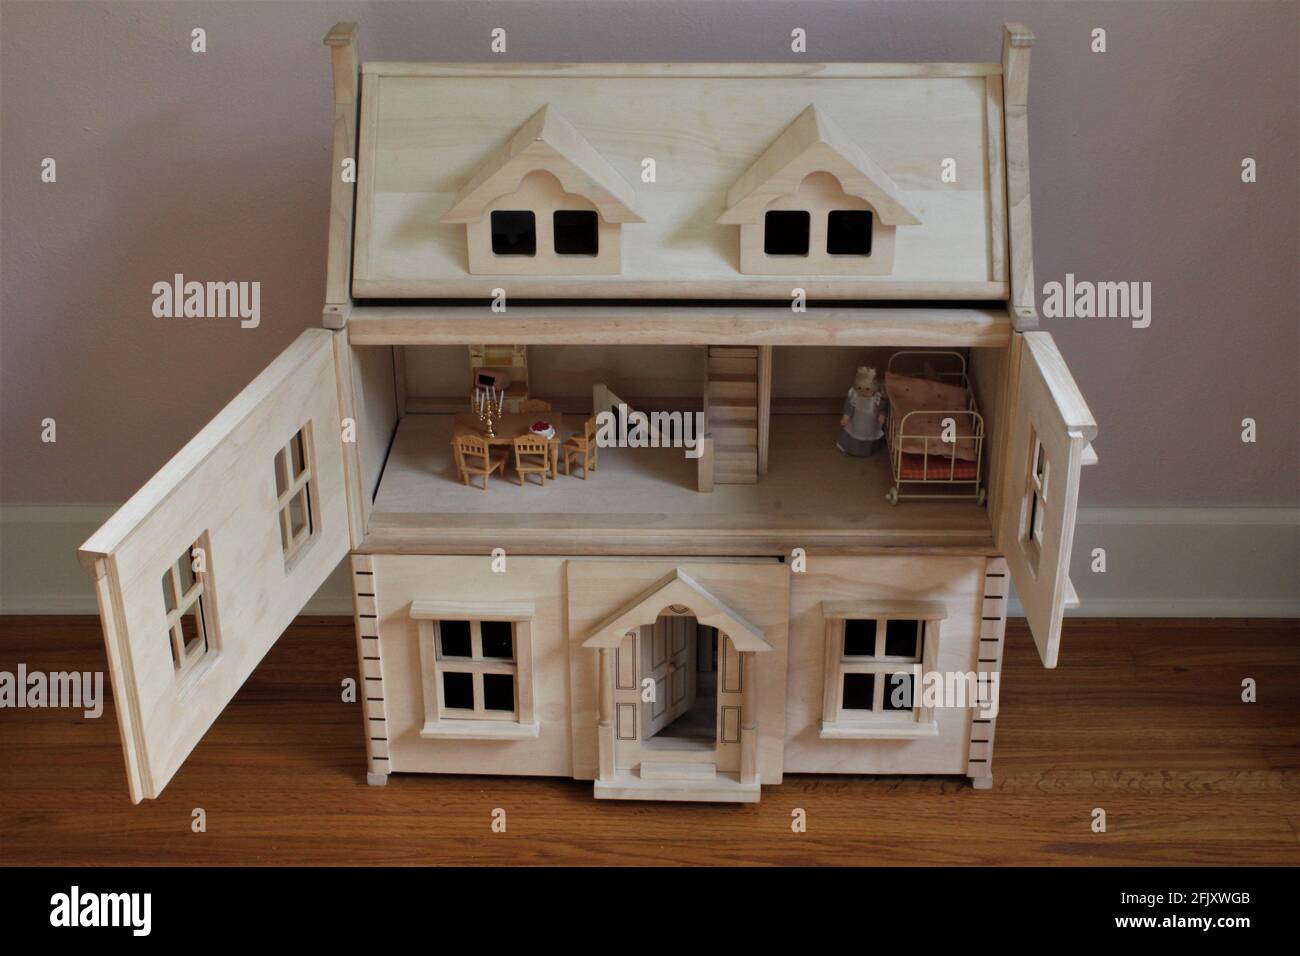 A DIY wooden doll house in a child's room to play pretend. The doors are open on the second floor and the dolls room is shown with miniature furniture Stock Photo